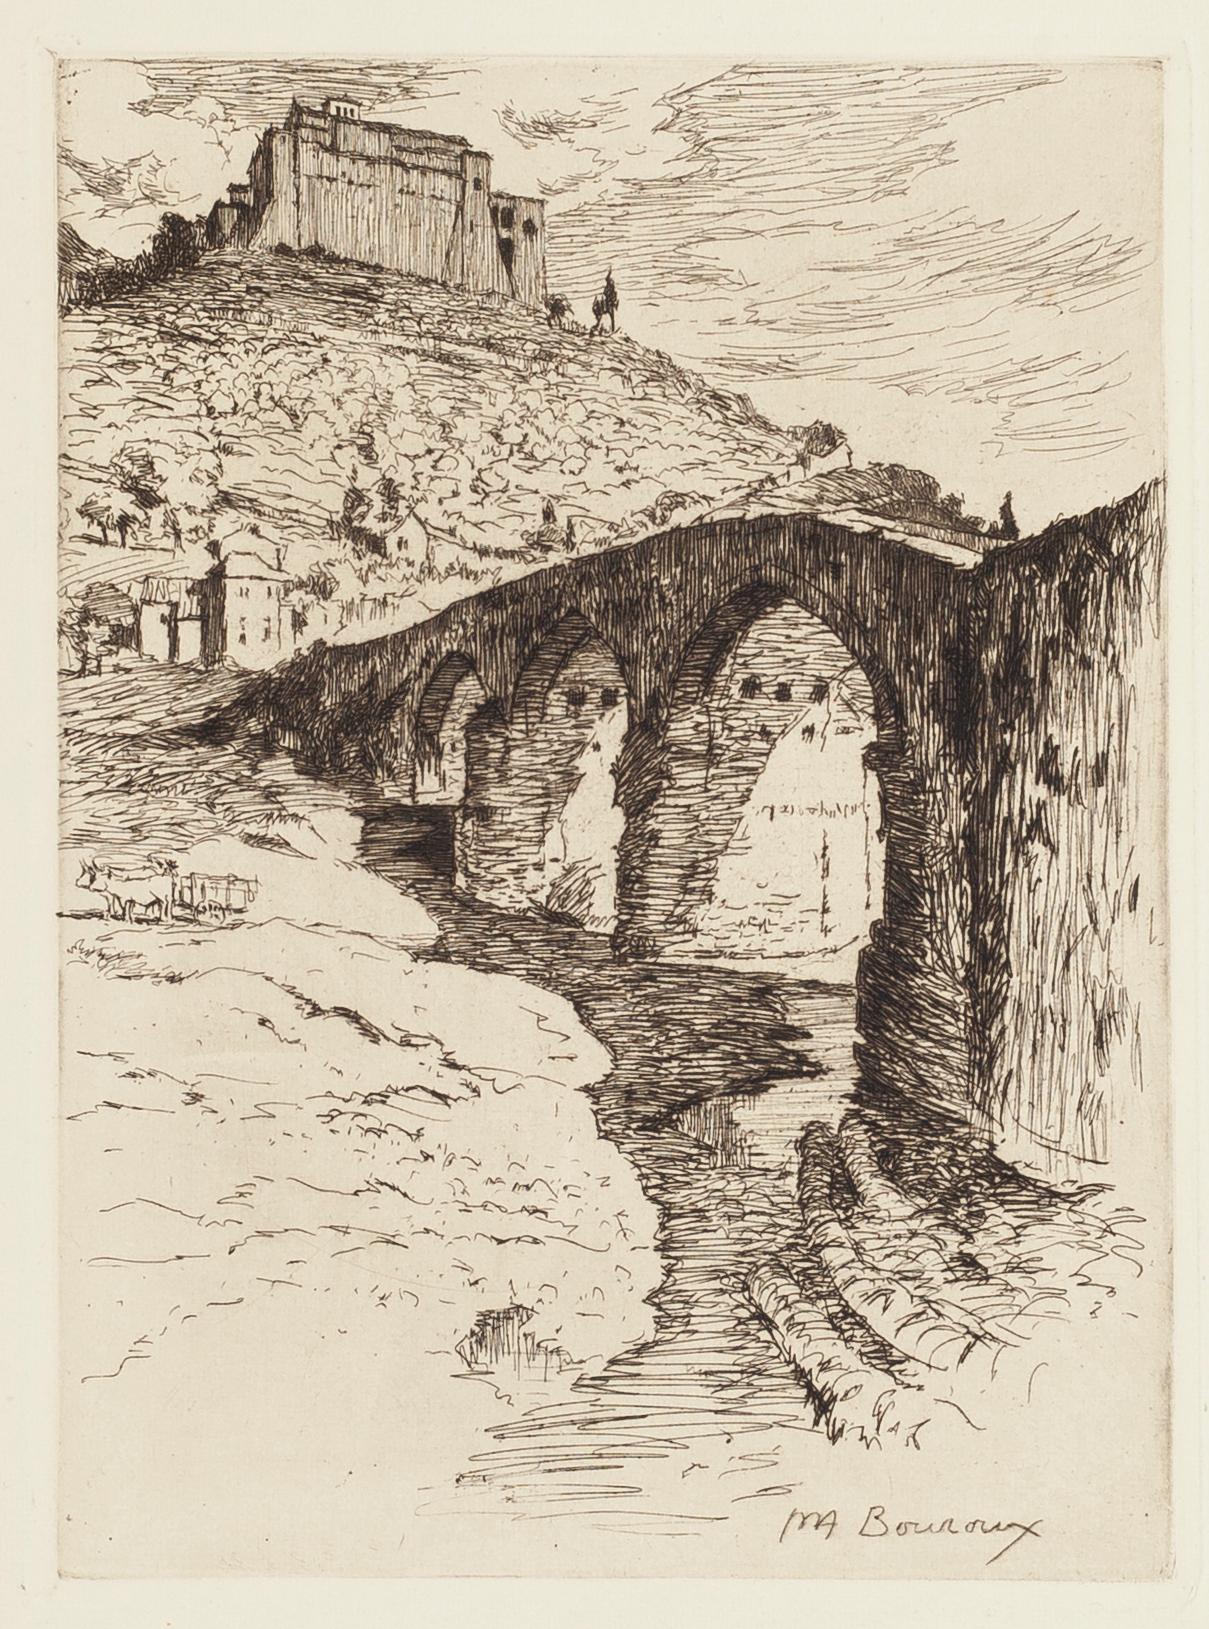 The Bridge - Original Etching by P, A, Bouroux - First Half of 20th Century